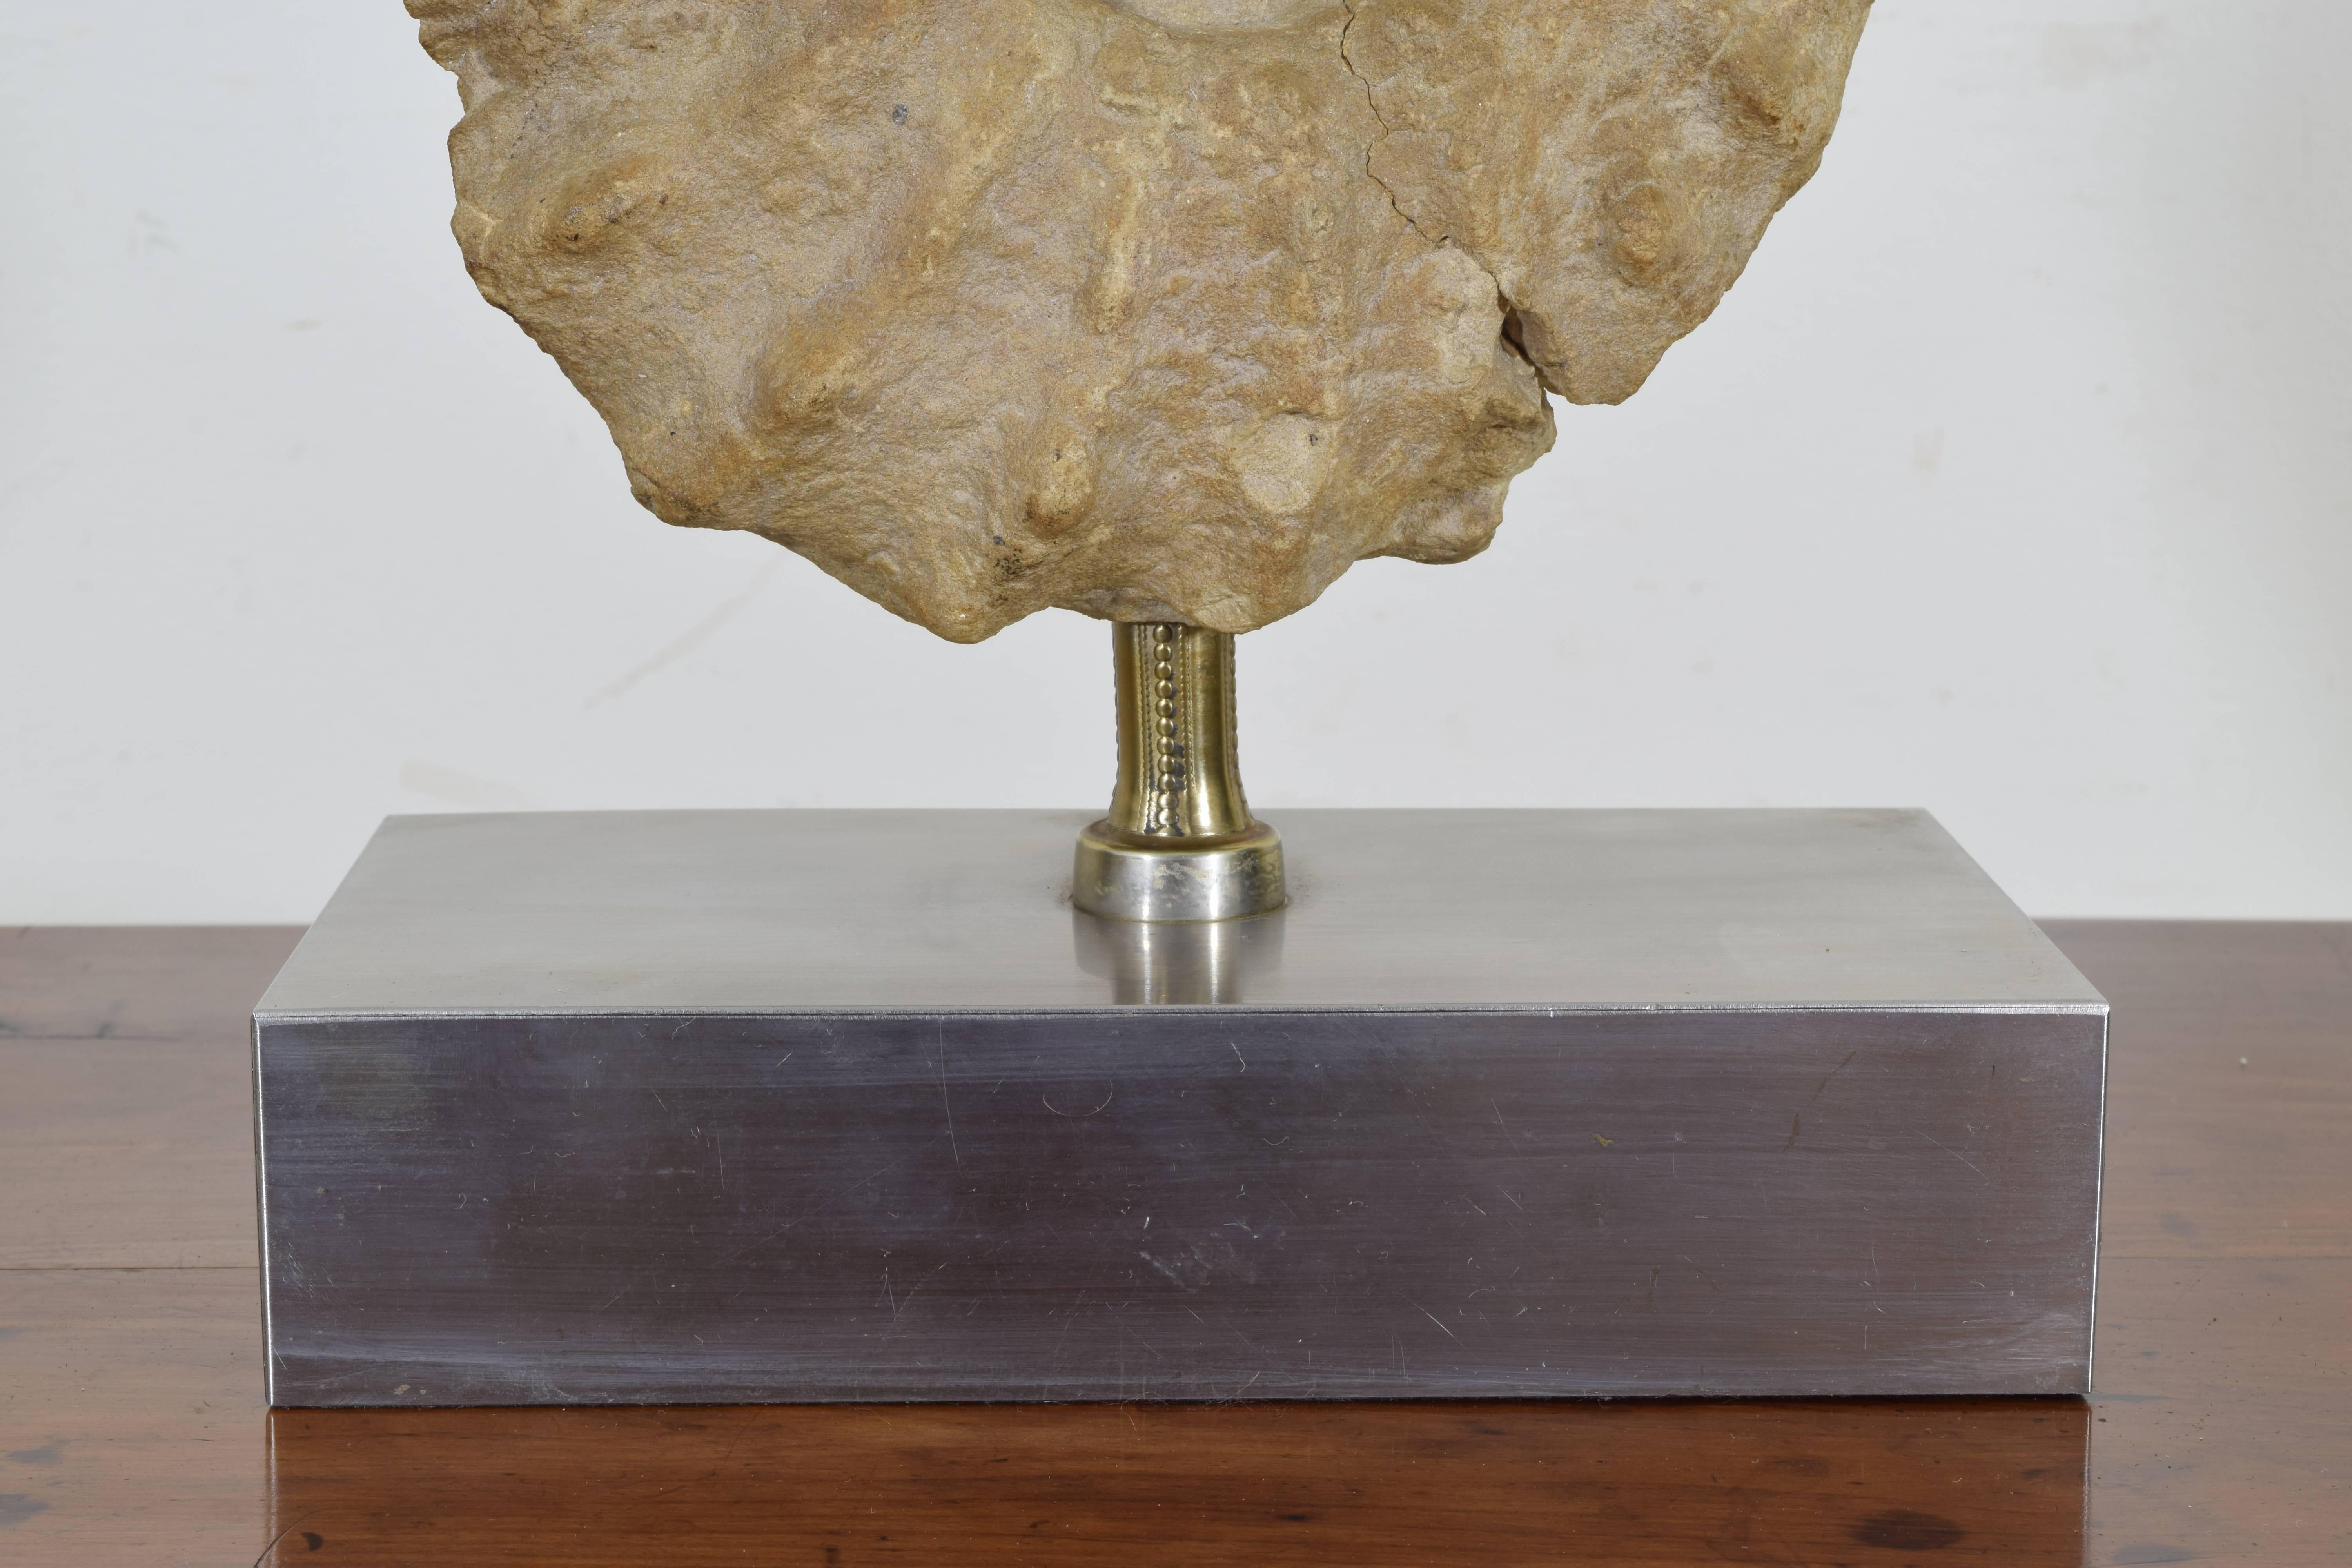 Metal French Ammonite Fossil Mounted as a Table Lamp on a Brushed Steel Base